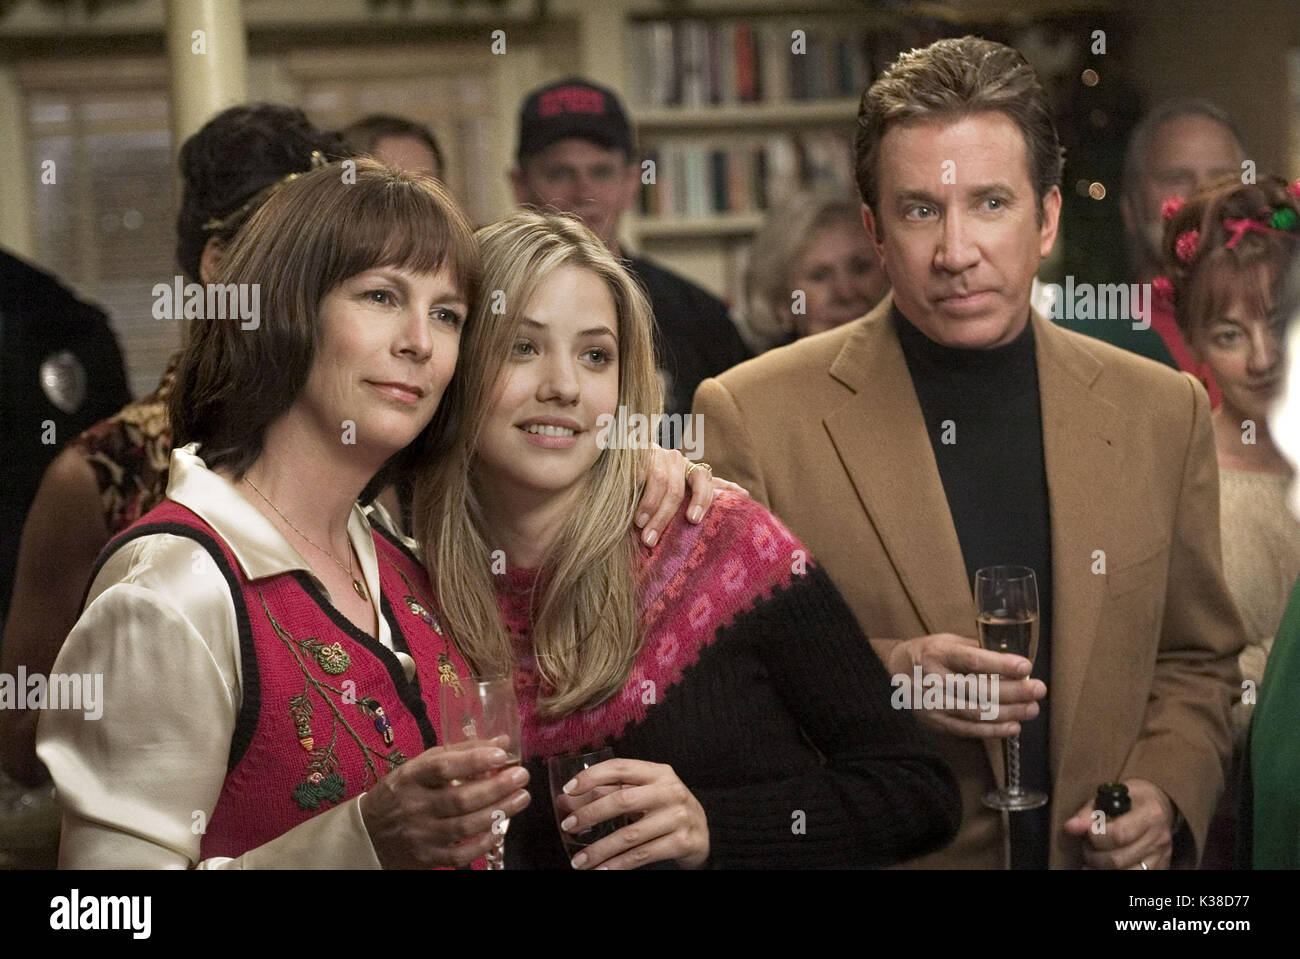 CHRISTMAS WITH THE KRANKS JAMIE LEE CURTIS, JULIE GONZALO, TIM ALLEN Date:  2004 Stock Photo - Alamy